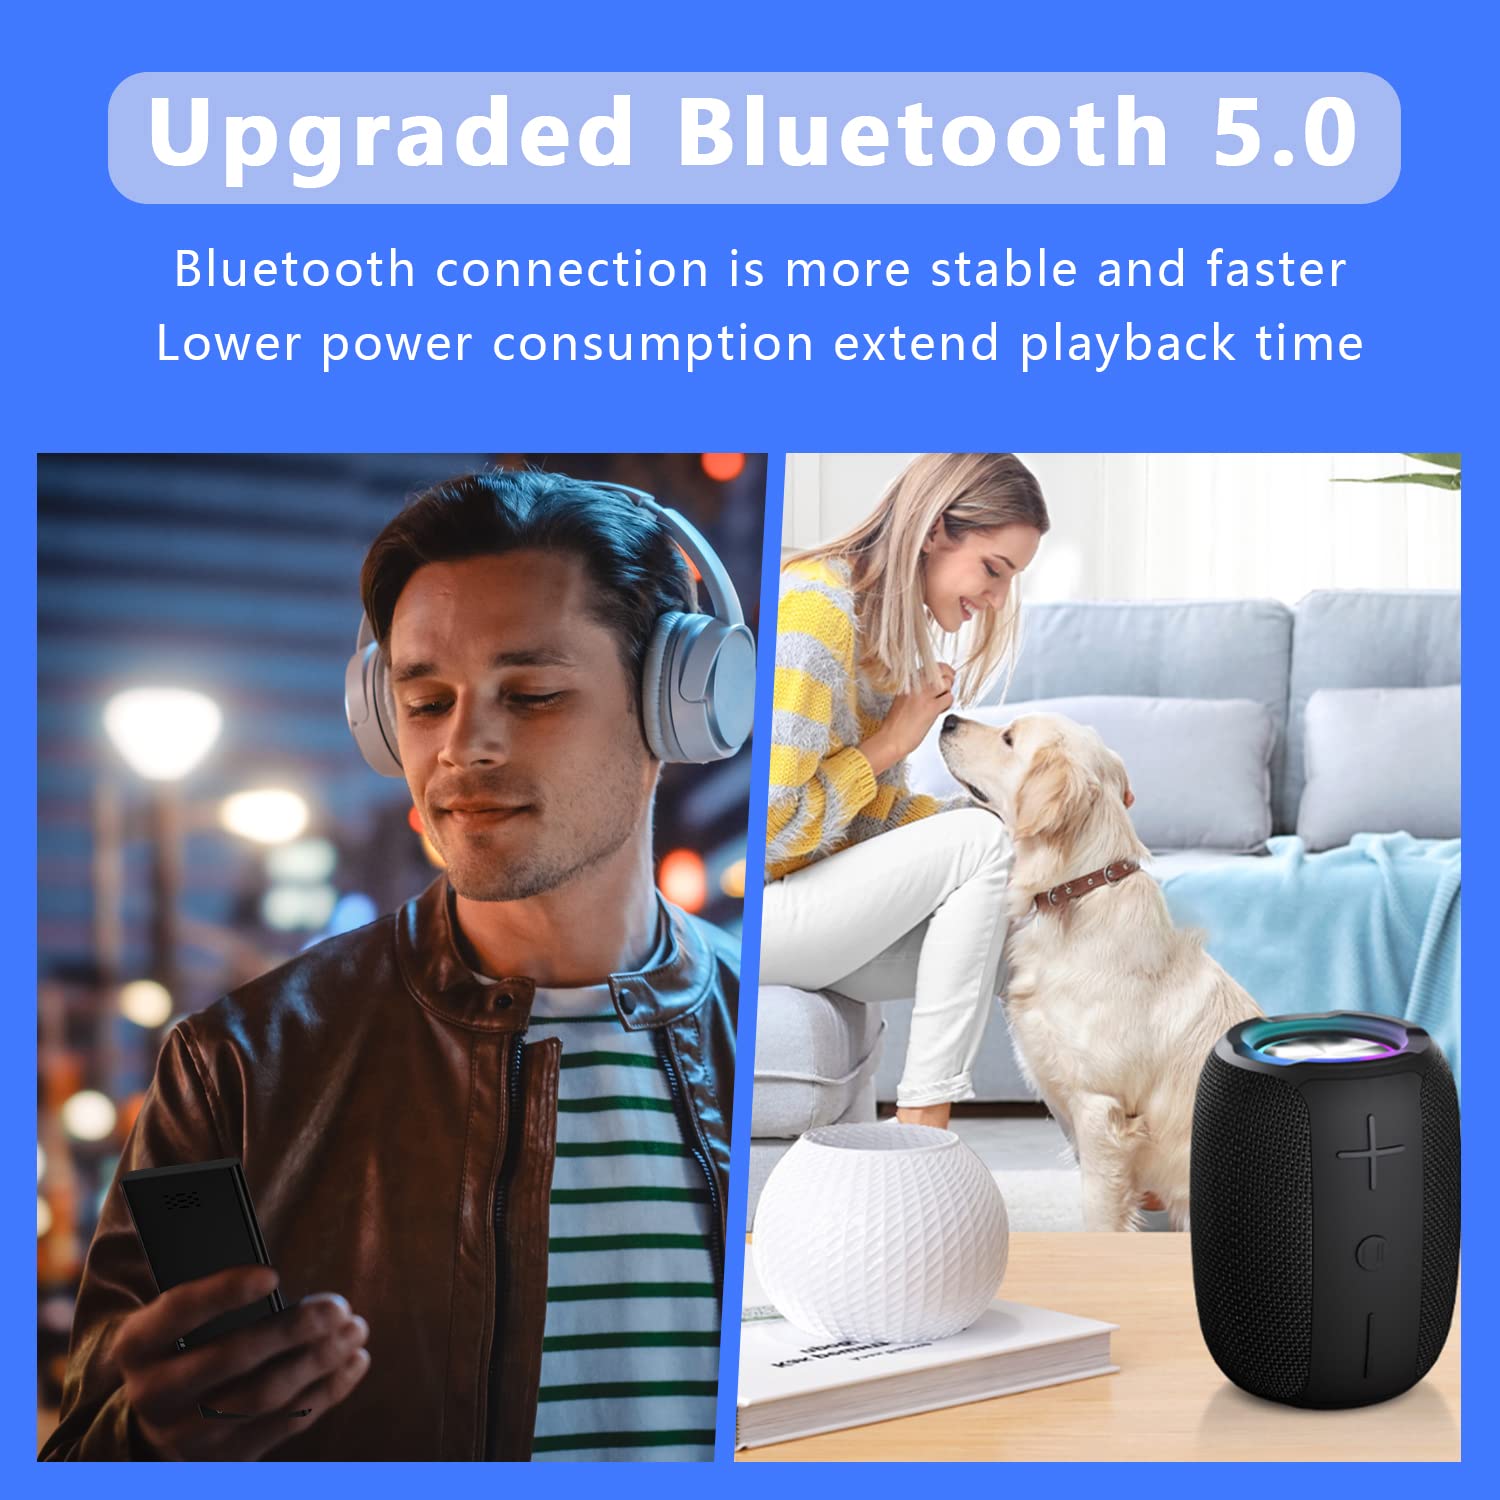 64GB MP3 Player with Bluetooth 5.0, AiMoonsa Music Player with Built-in HD Speaker, FM Radio, Voice Recorder, HiFi Sound, E-Book Function, Earphones Included